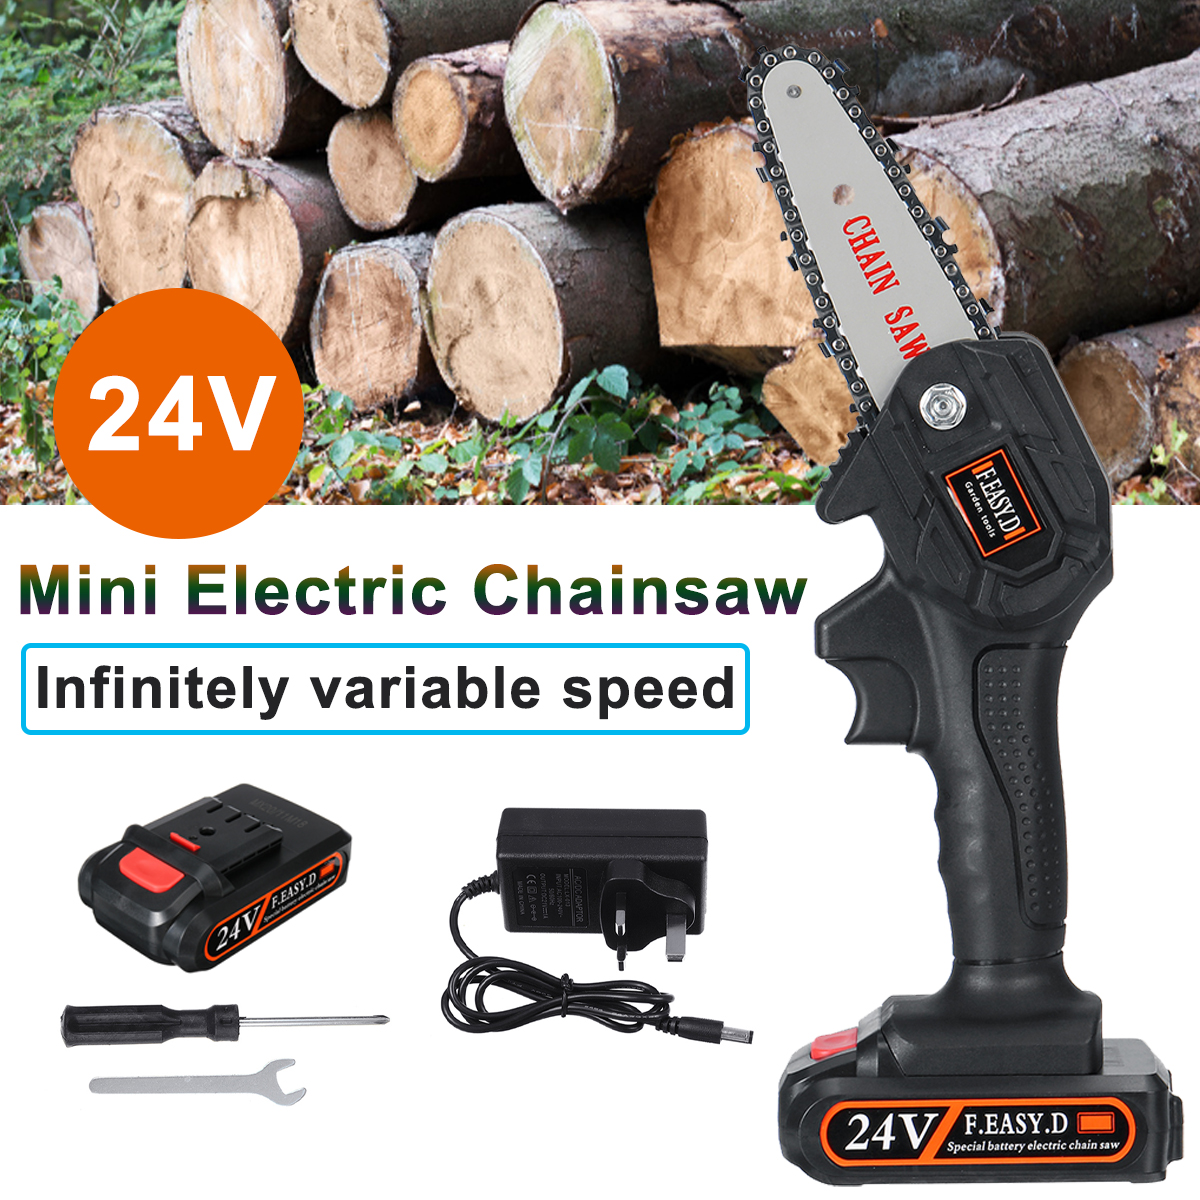 24V-550W-Rechargeable-Mini-Electric-Chainsaw-Handheld-Wood-Pruning-Saw-1791168-1